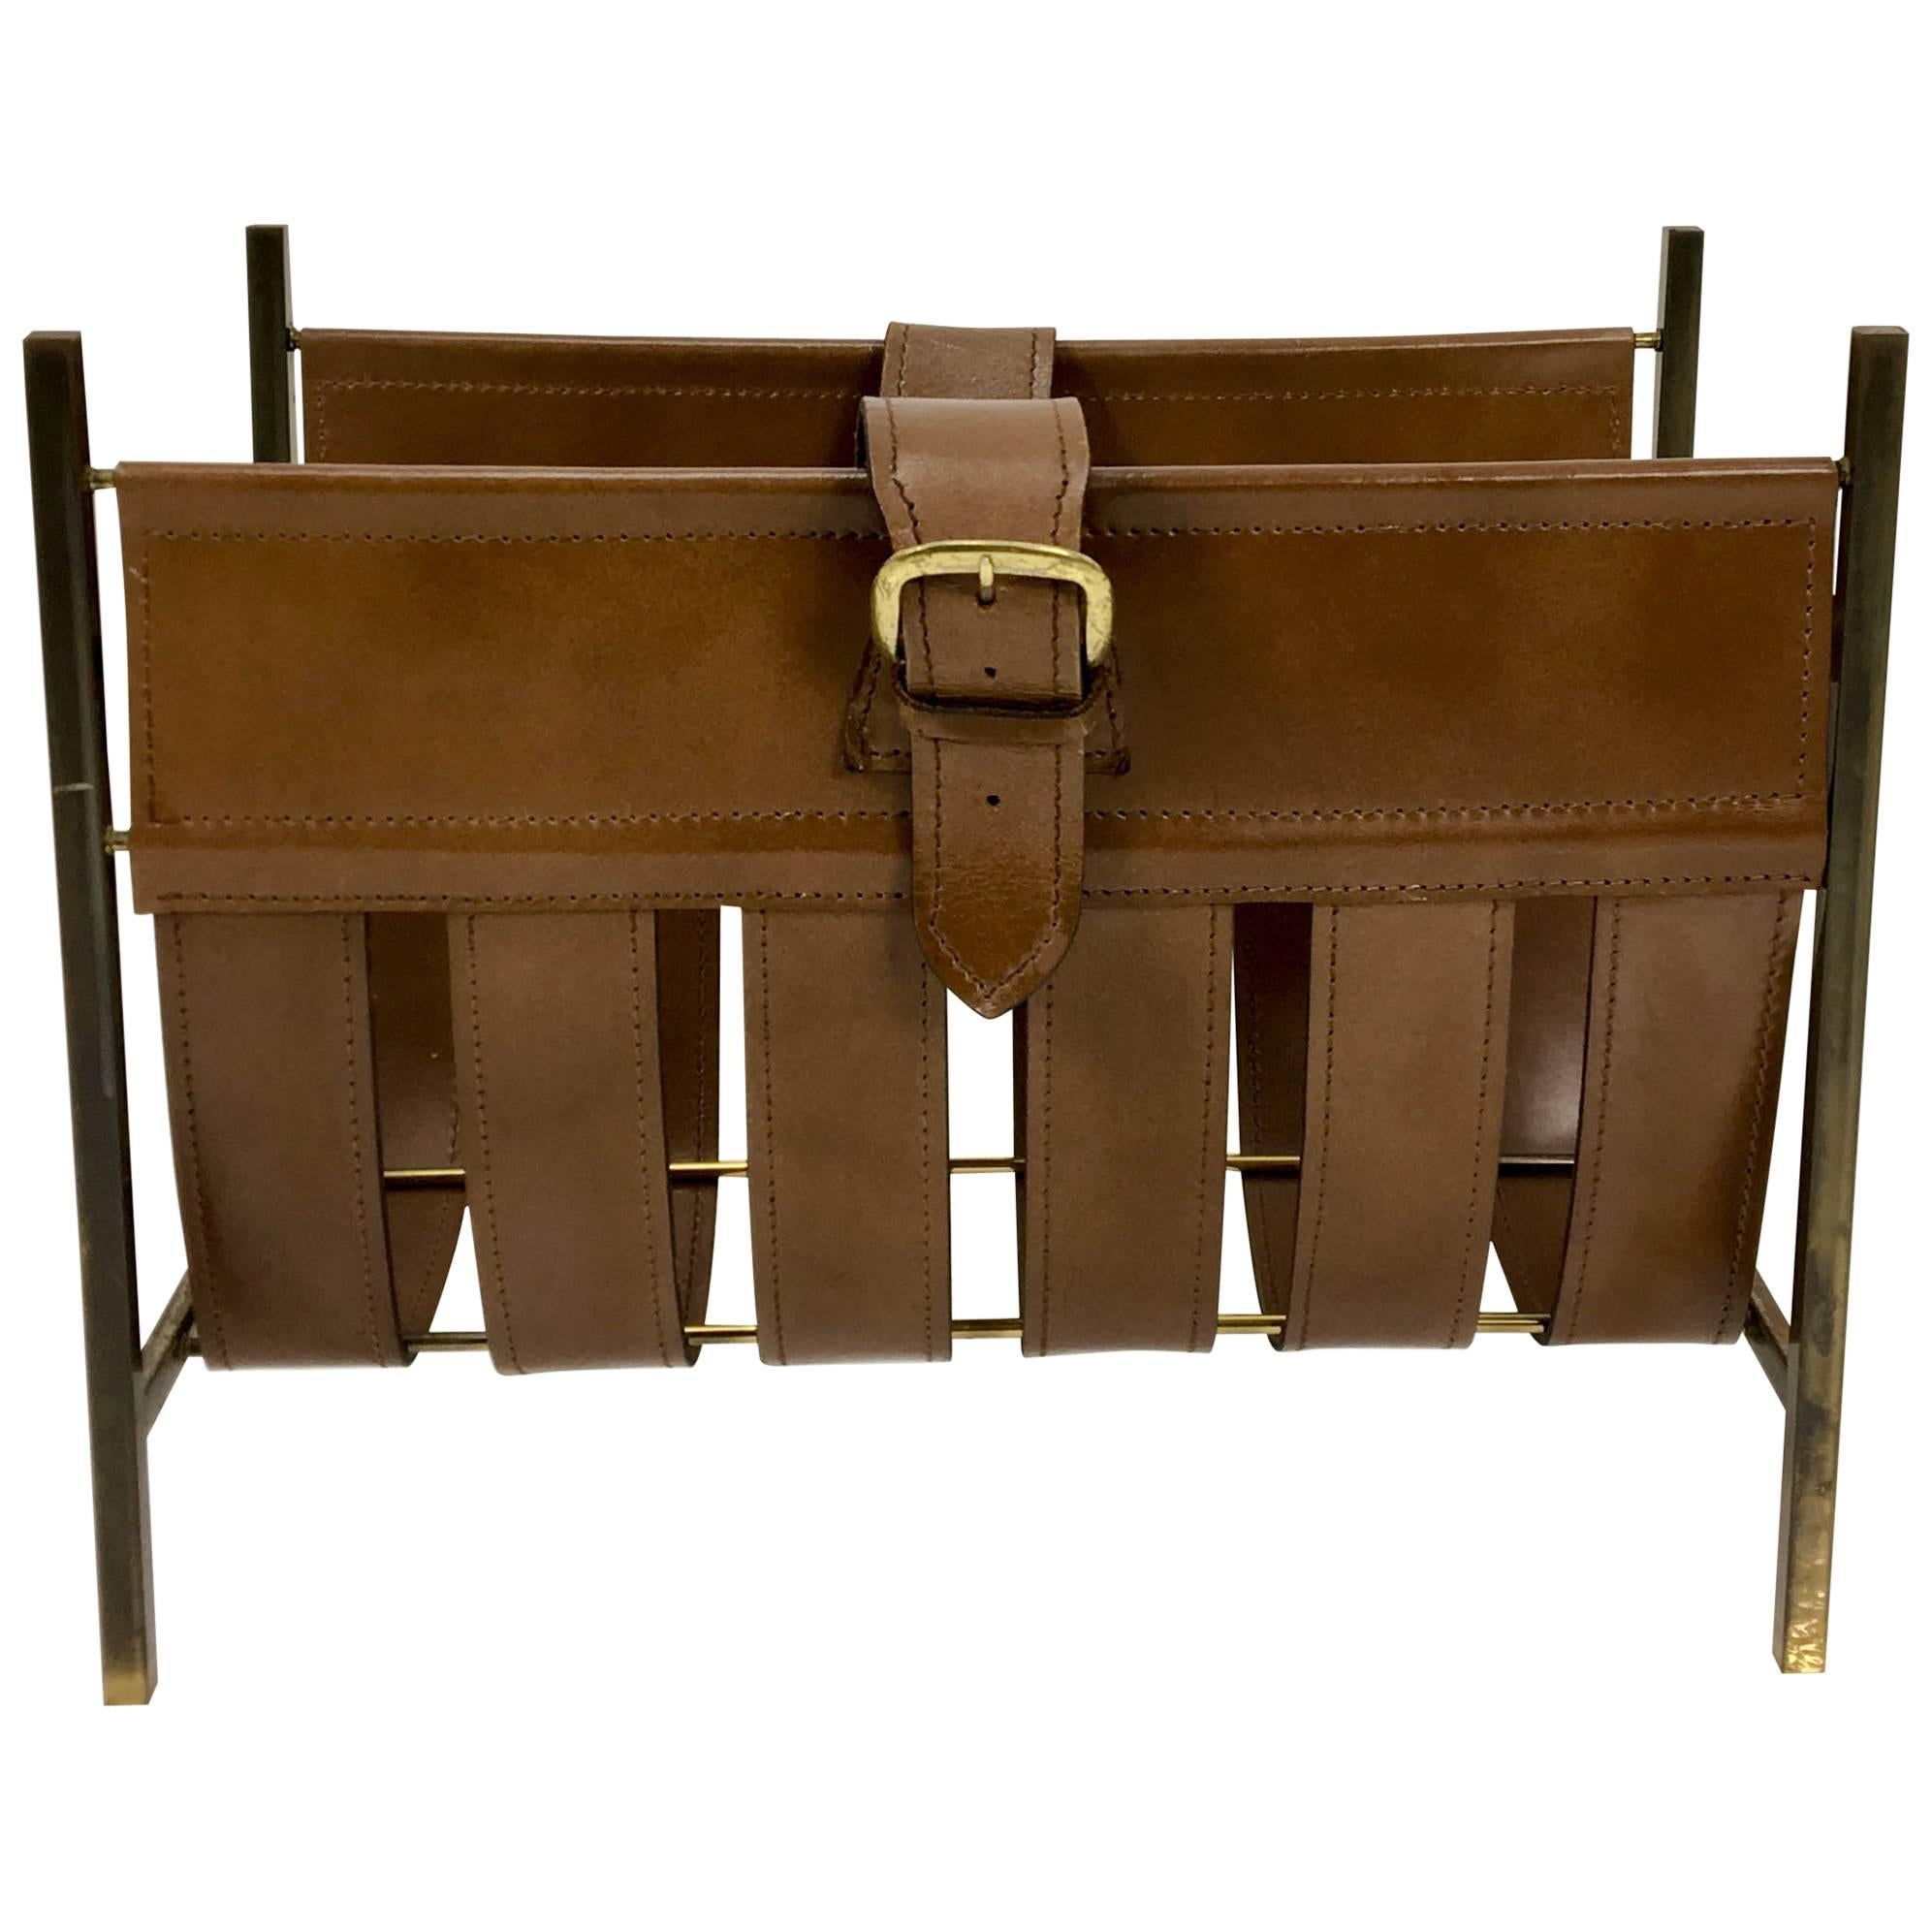 1950s Leather Magazine Rack by Jacques Adnet